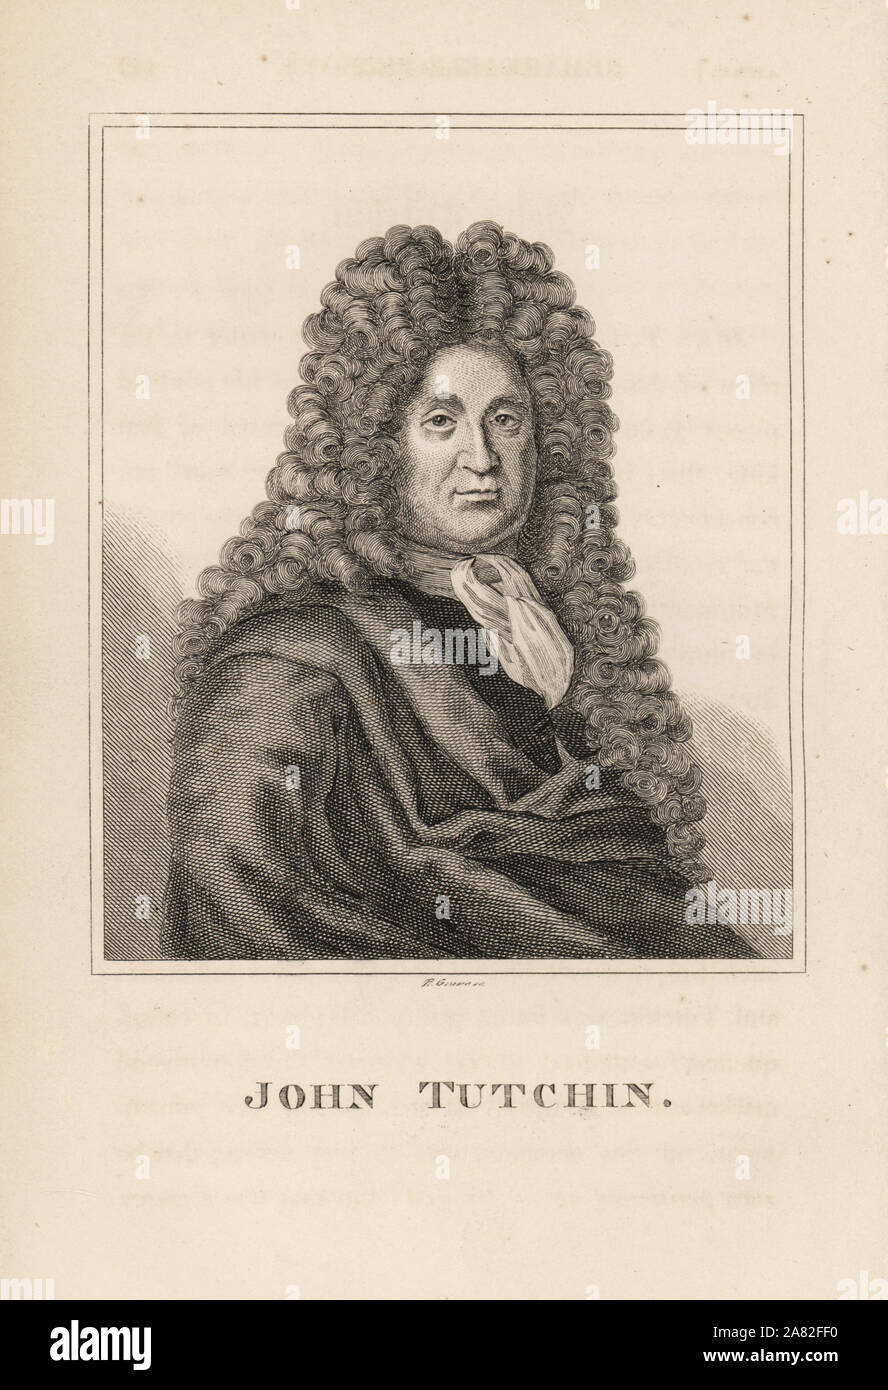 John Tutchin, political writer, poet and agitator in the reign of King James II, died 1707. Engraving by R. Grave from James Caulfield's Portraits, Memoirs and Characters of Remarkable Persons, London, 1819. Stock Photo